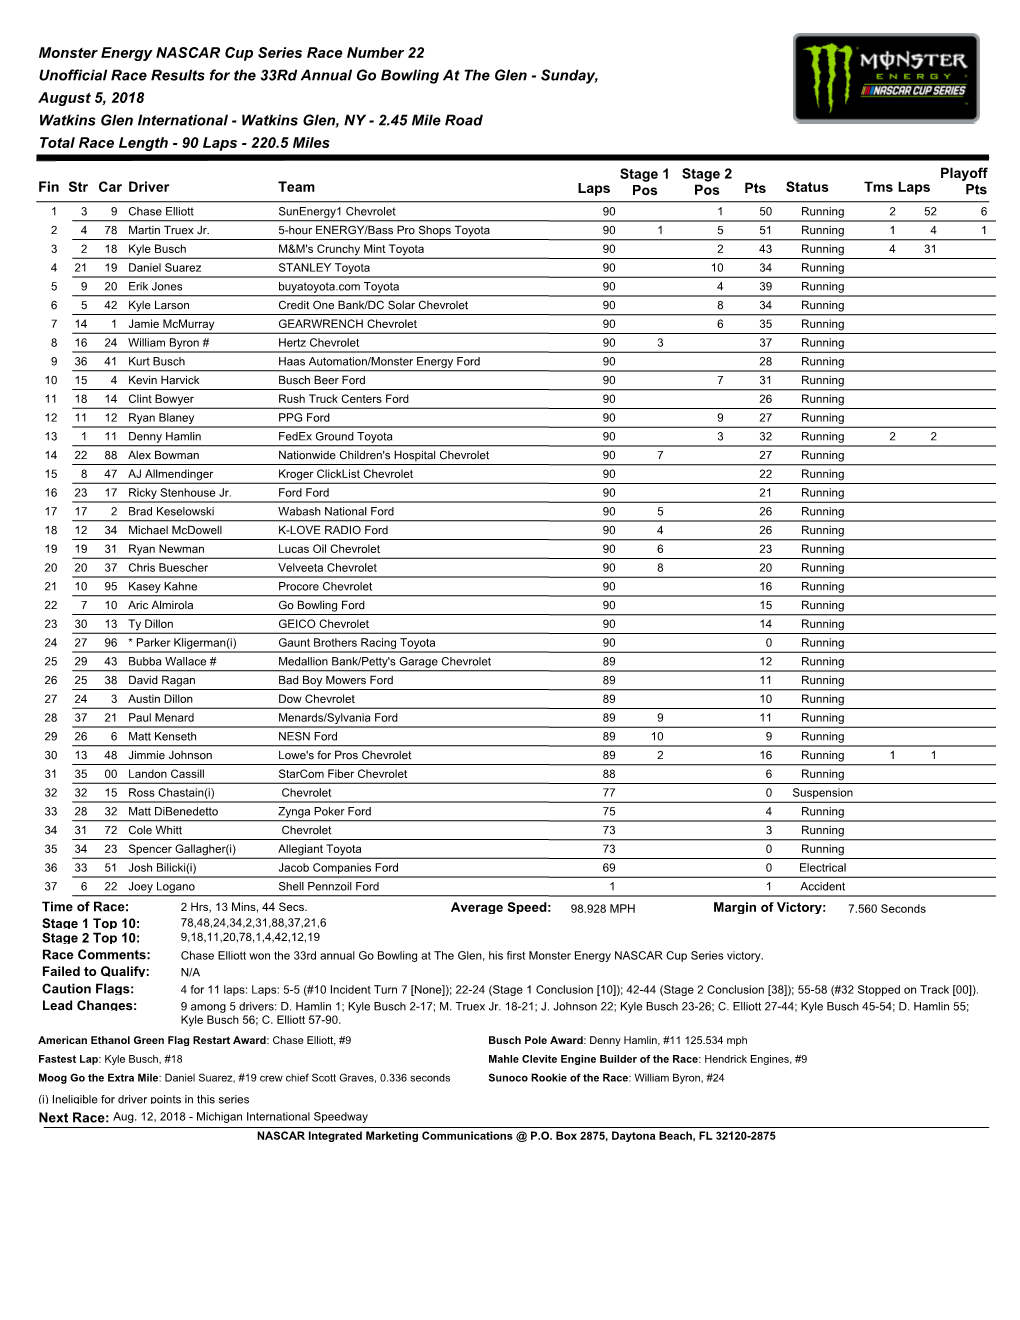 Monster Energy NASCAR Cup Series Race Number 22 Unofficial Race